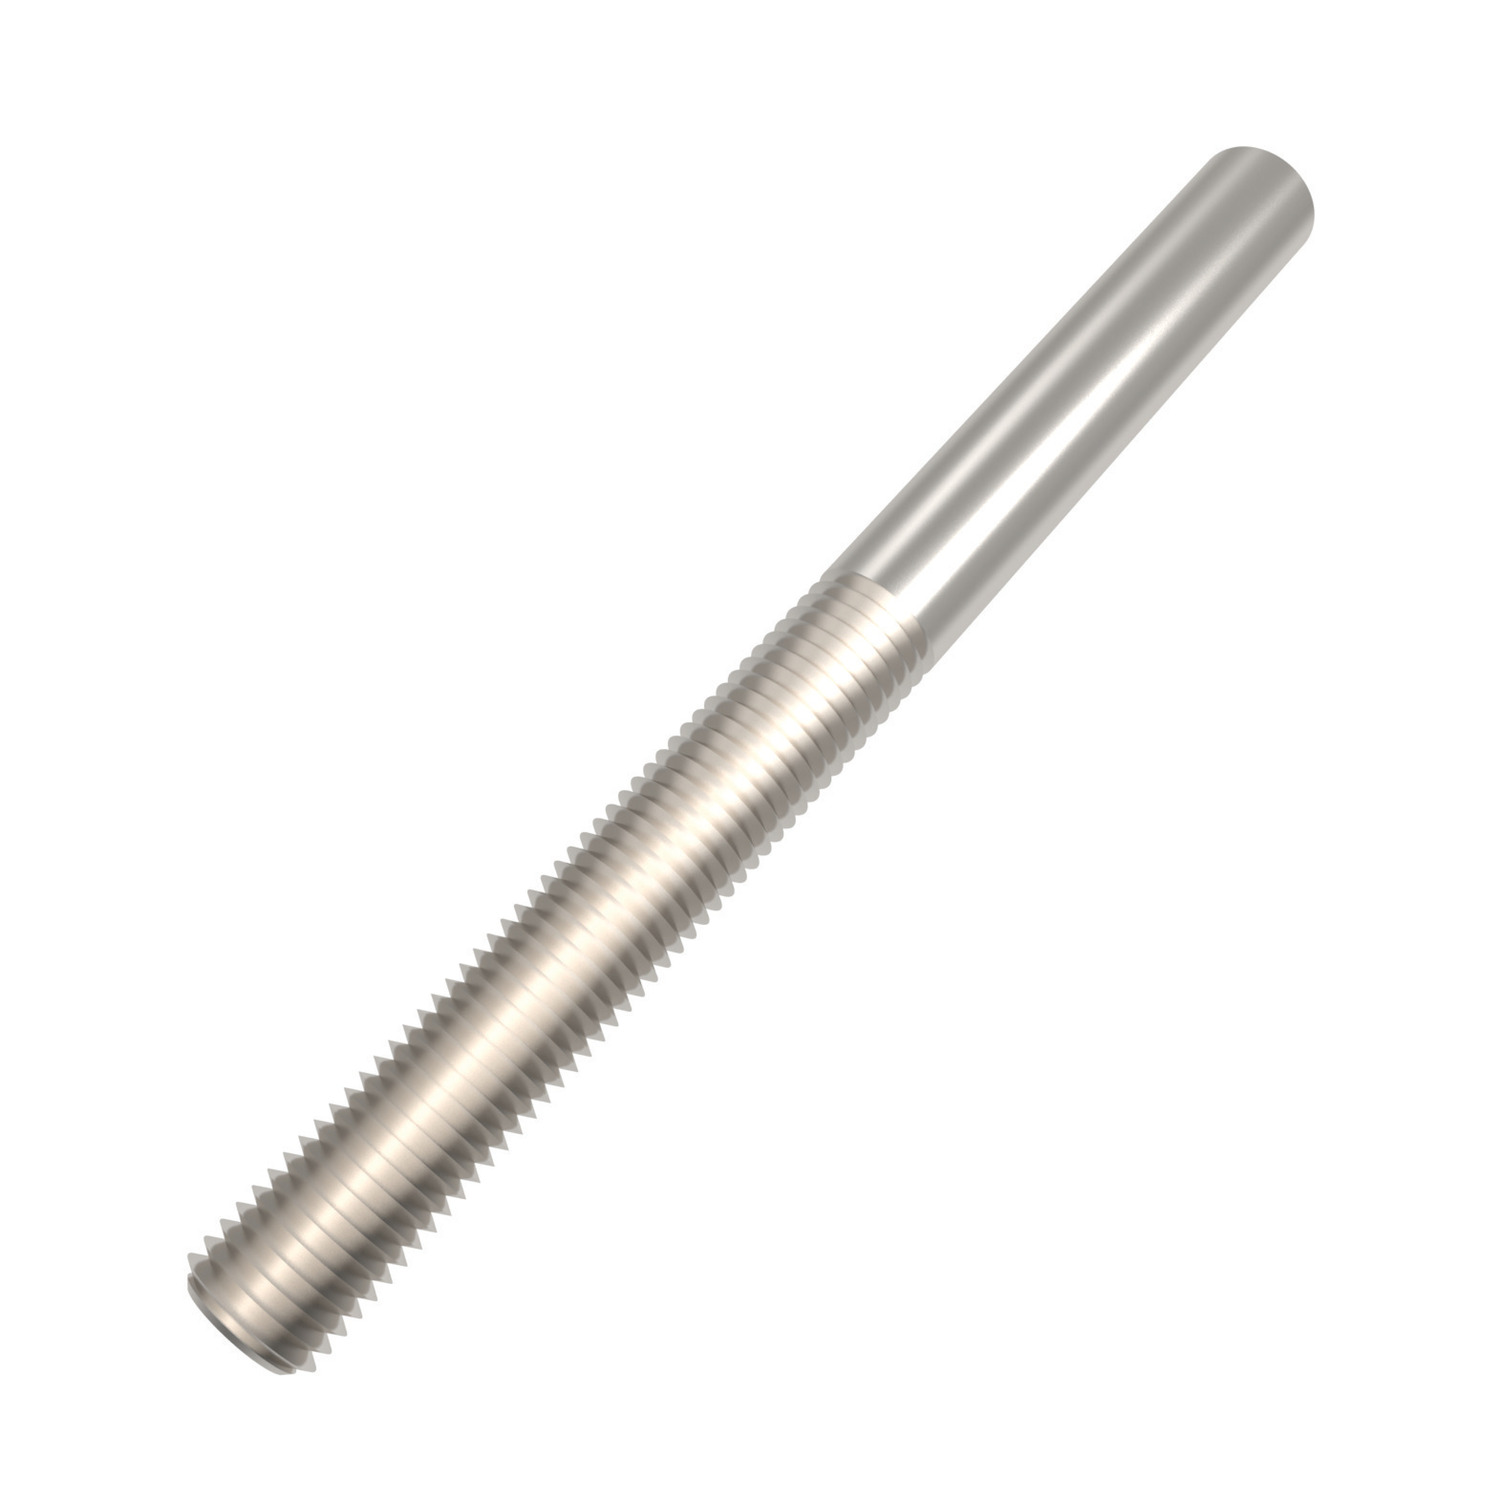 R3868.L020-A4 Welding Studs LH M20 A4 s/s Not to be used for lifting unless SWL marked.